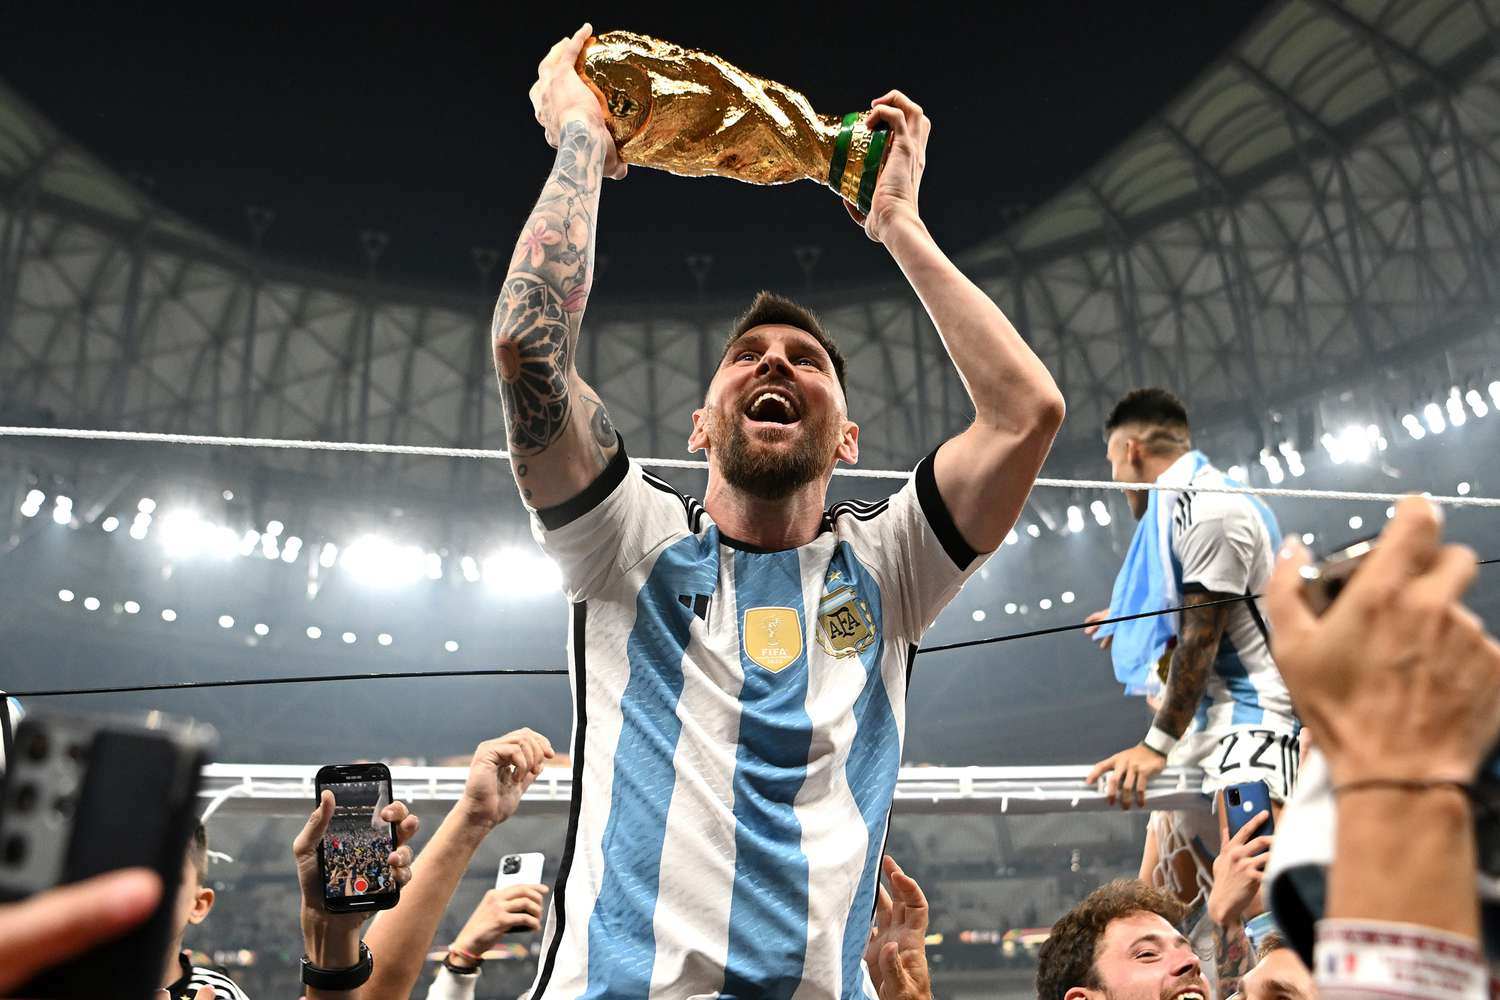 Messi with world cup trophy most like pictures on Instagram